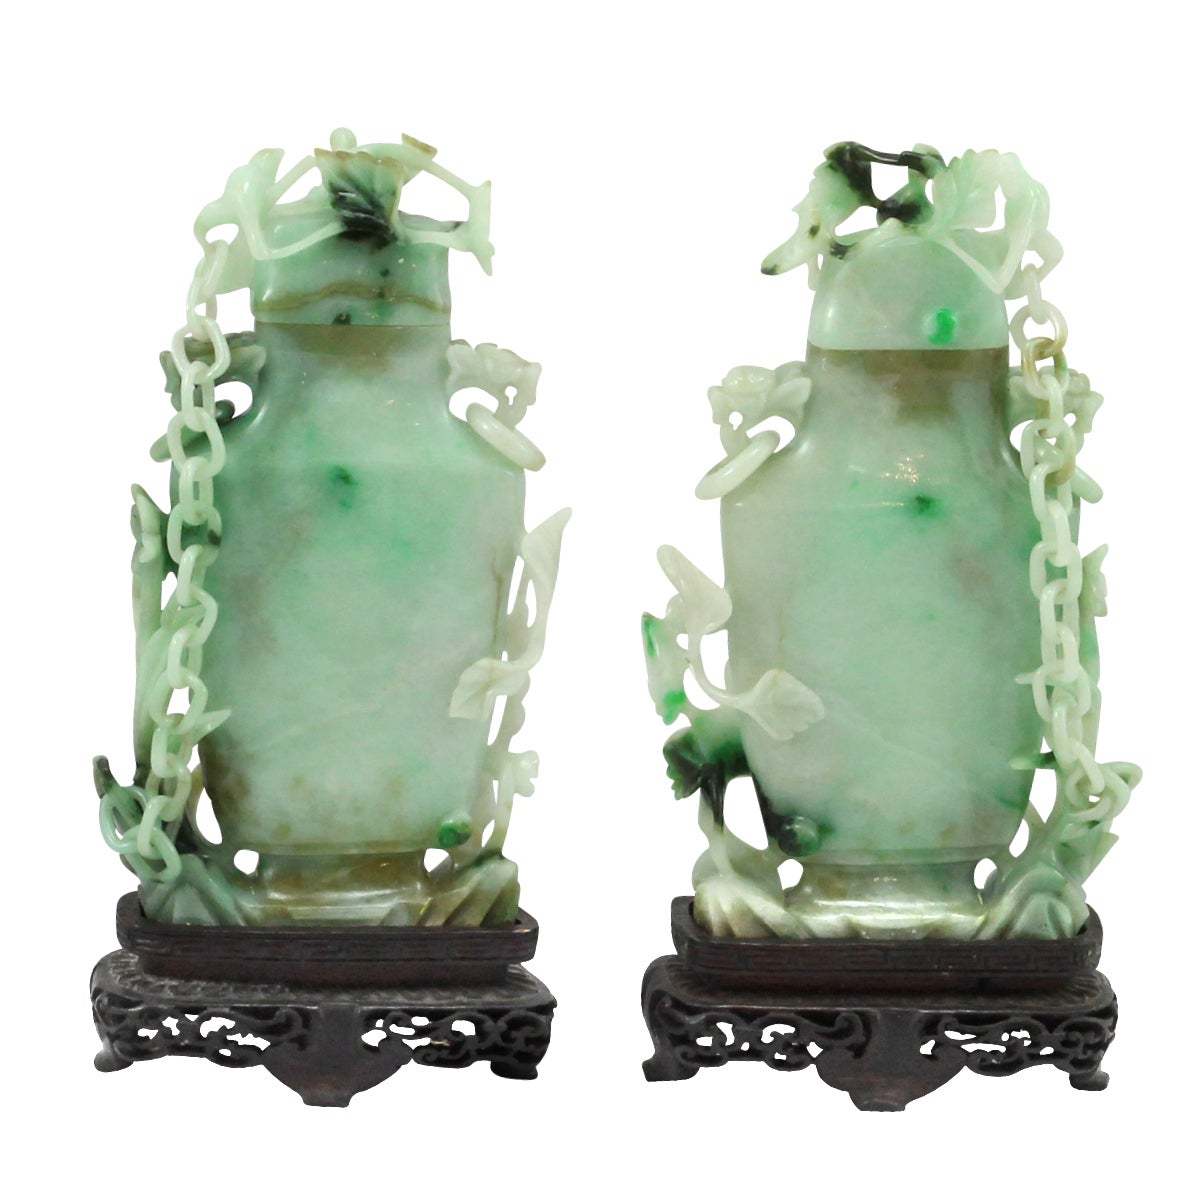 A pair of early 20th century Chinese carved jadeite lidded vases. These specimens have each been expertly carved from a solid piece of jadeite, with incredible attention to detail paid to the fine chain which links the lids to the base of each vase.